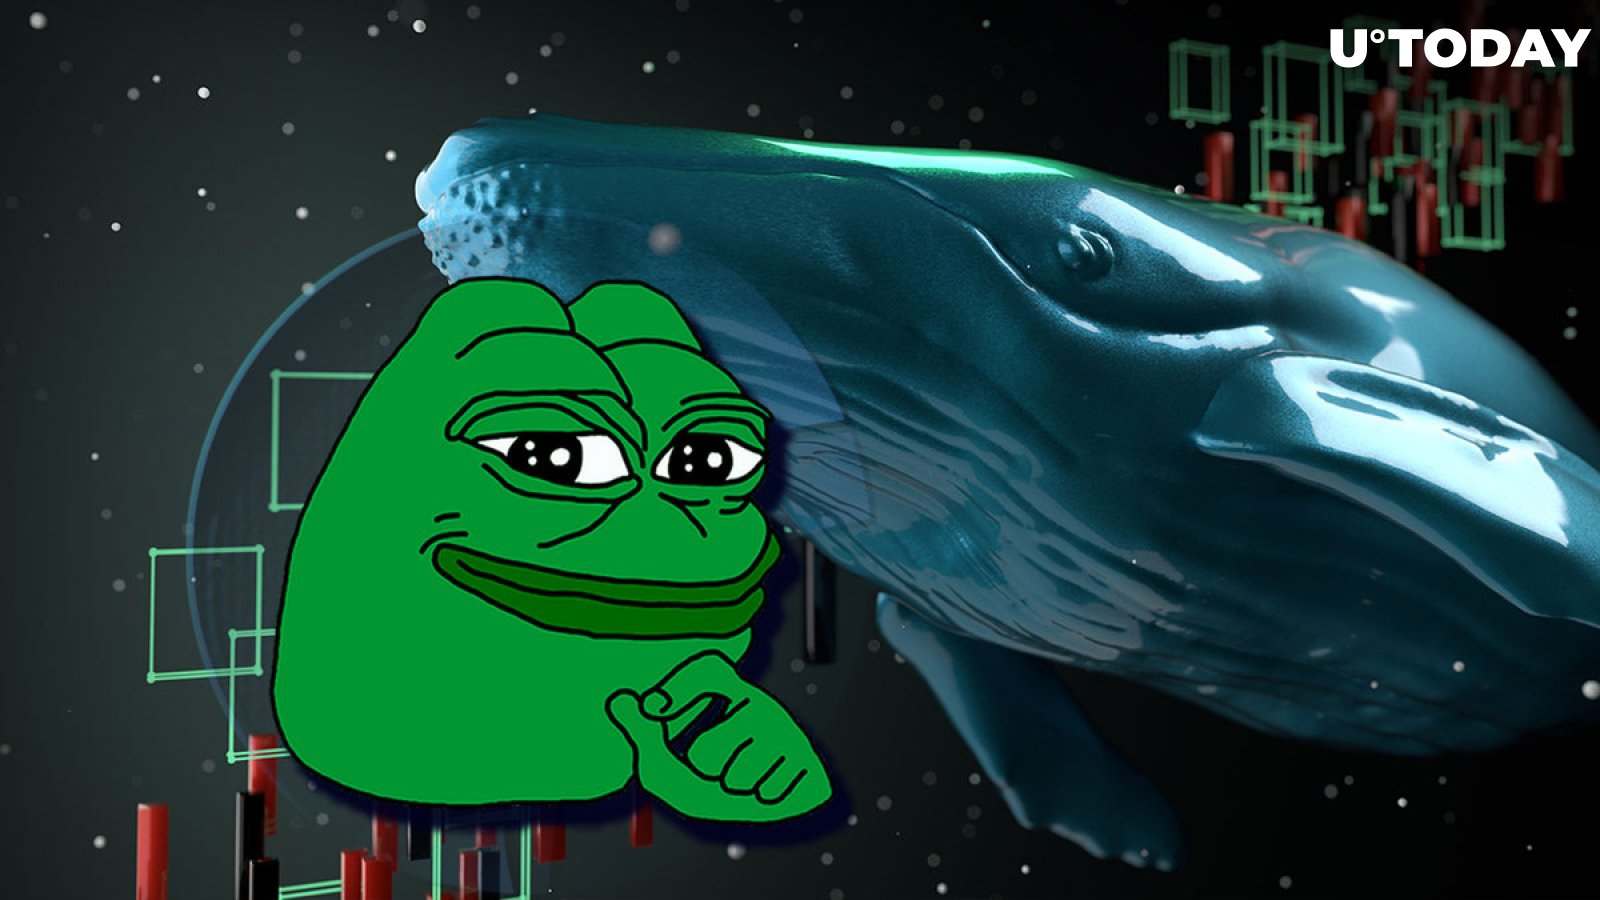 This Pepe Whale Sold 14% of PEPE Supply, Could Be Developer?